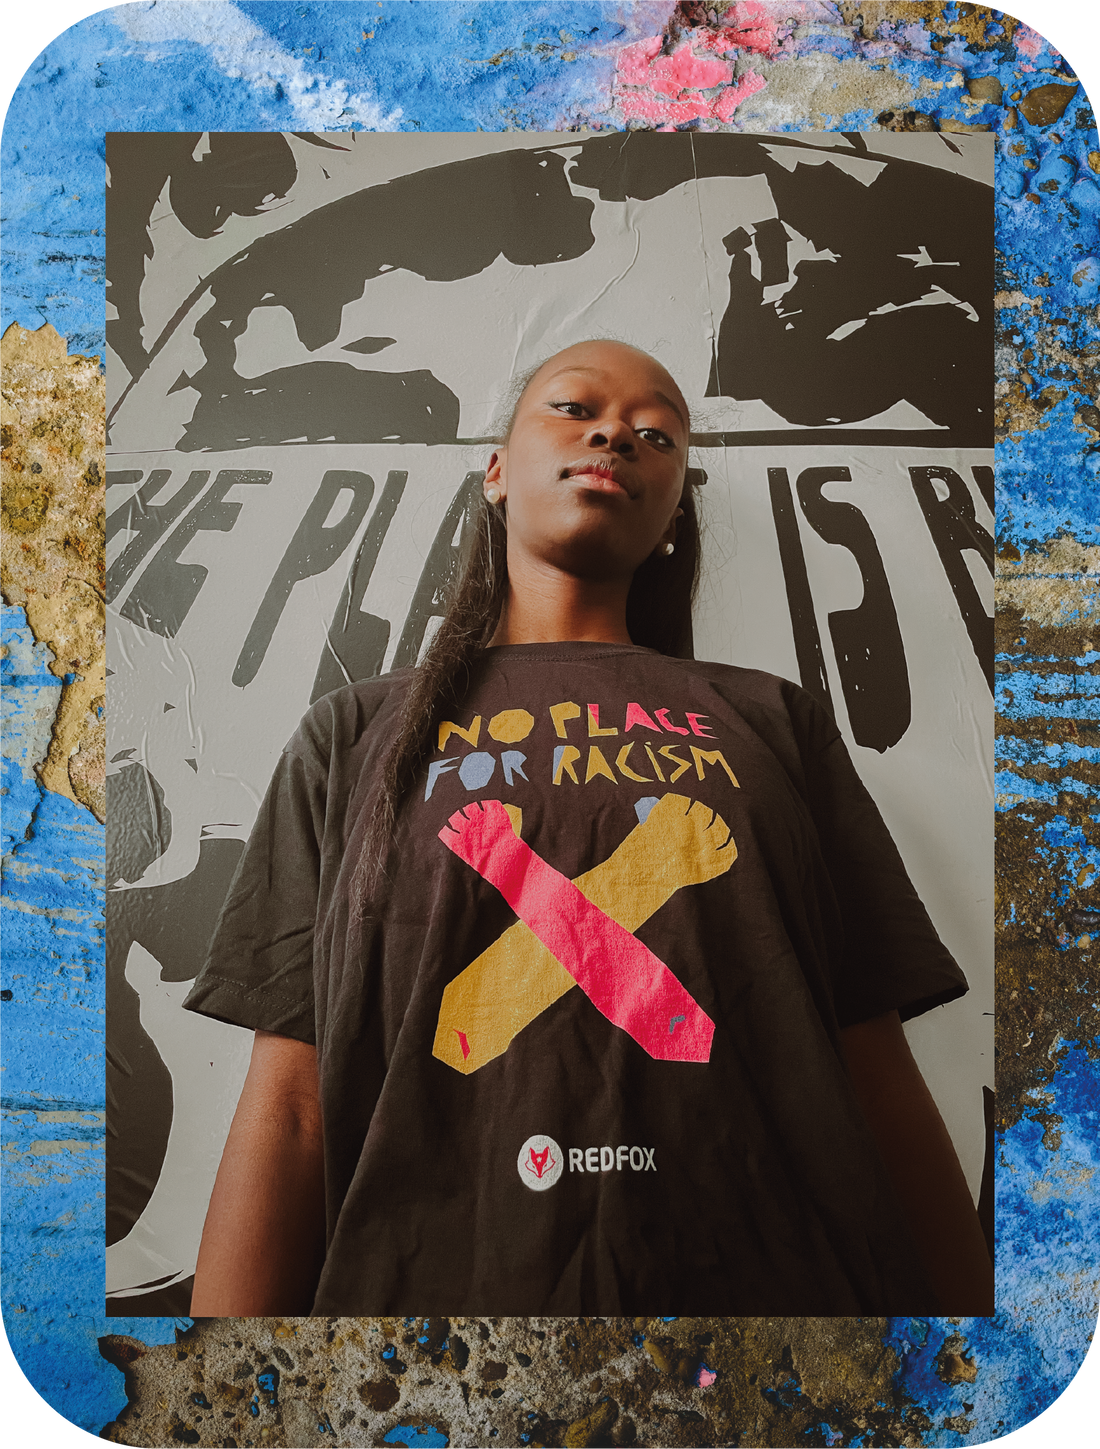 No place for racism T-shirt